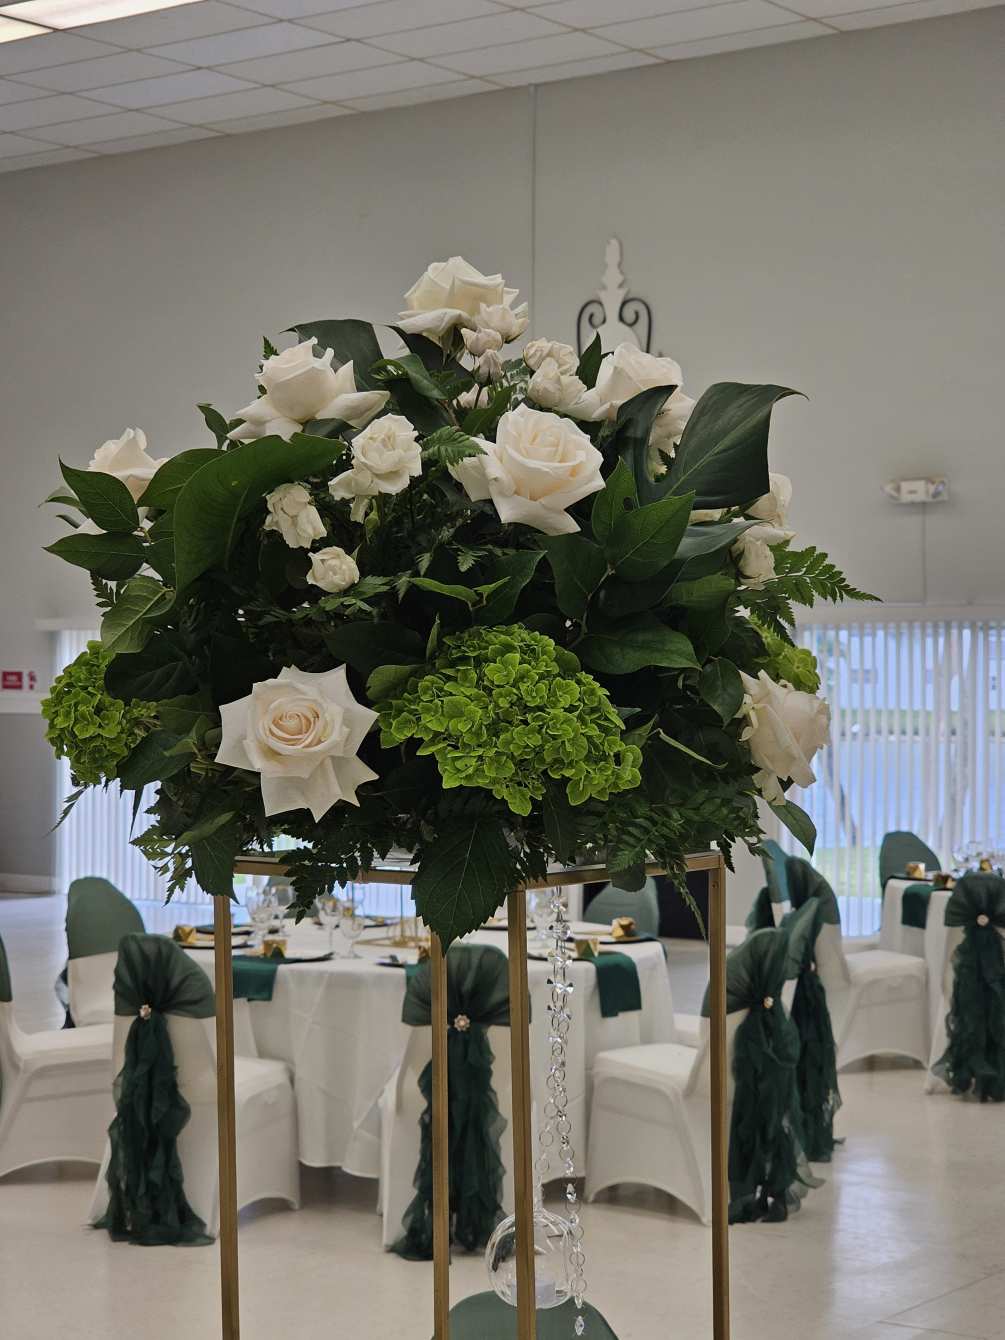 These centerpieces are perfect for weddings, birthdays, corporate events etc. They can